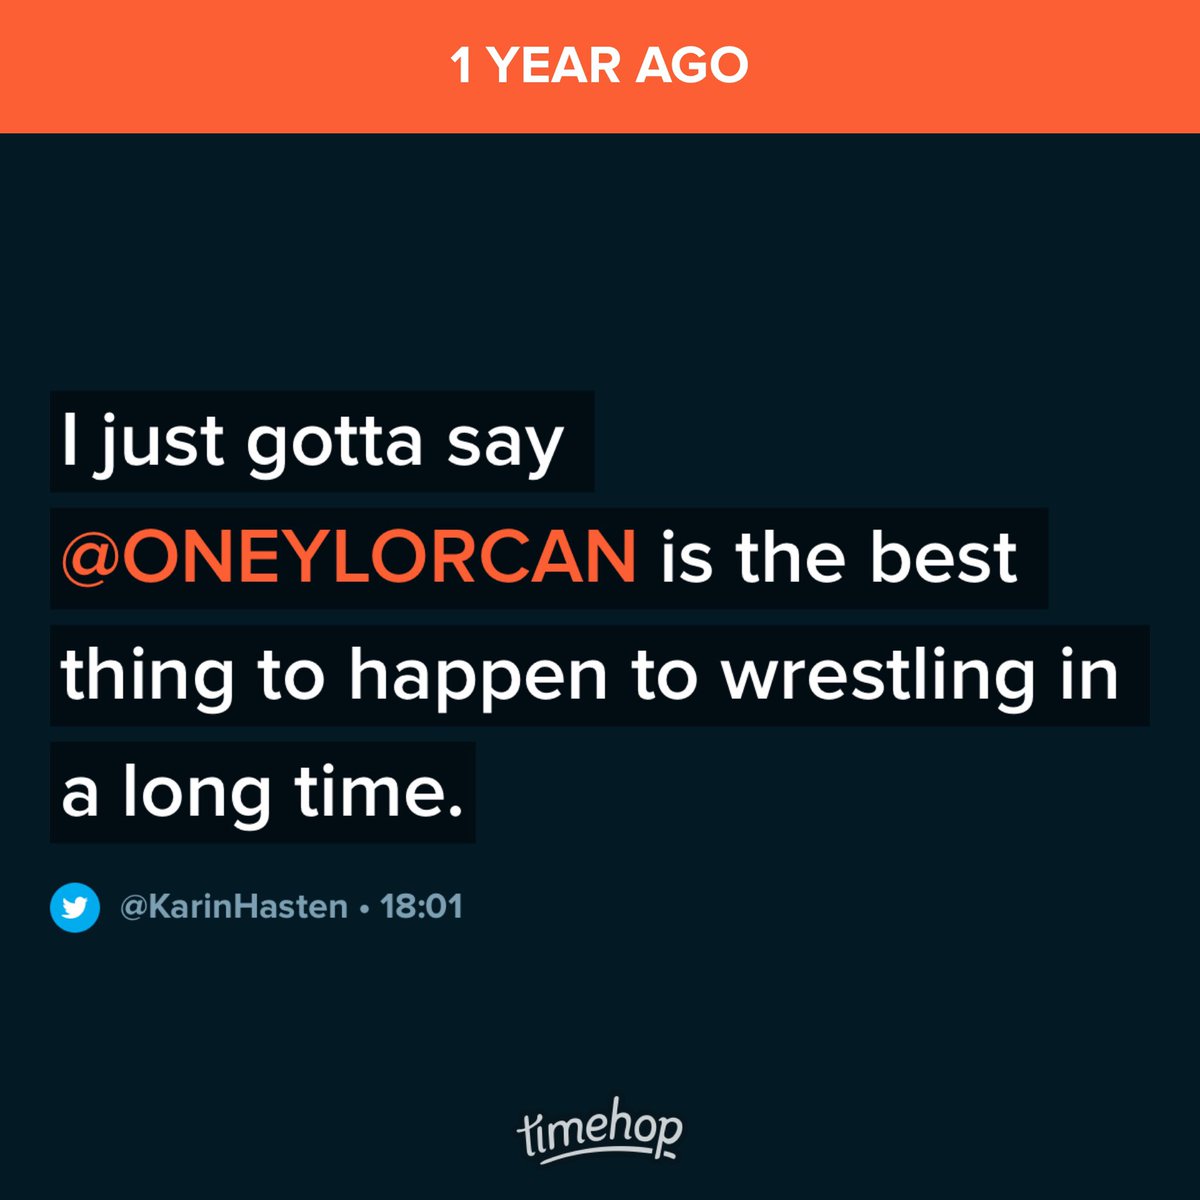 I said this about @ONEYLORCAN last year. Still is true. Best of luck ☝🏻☝🏻☝🏻